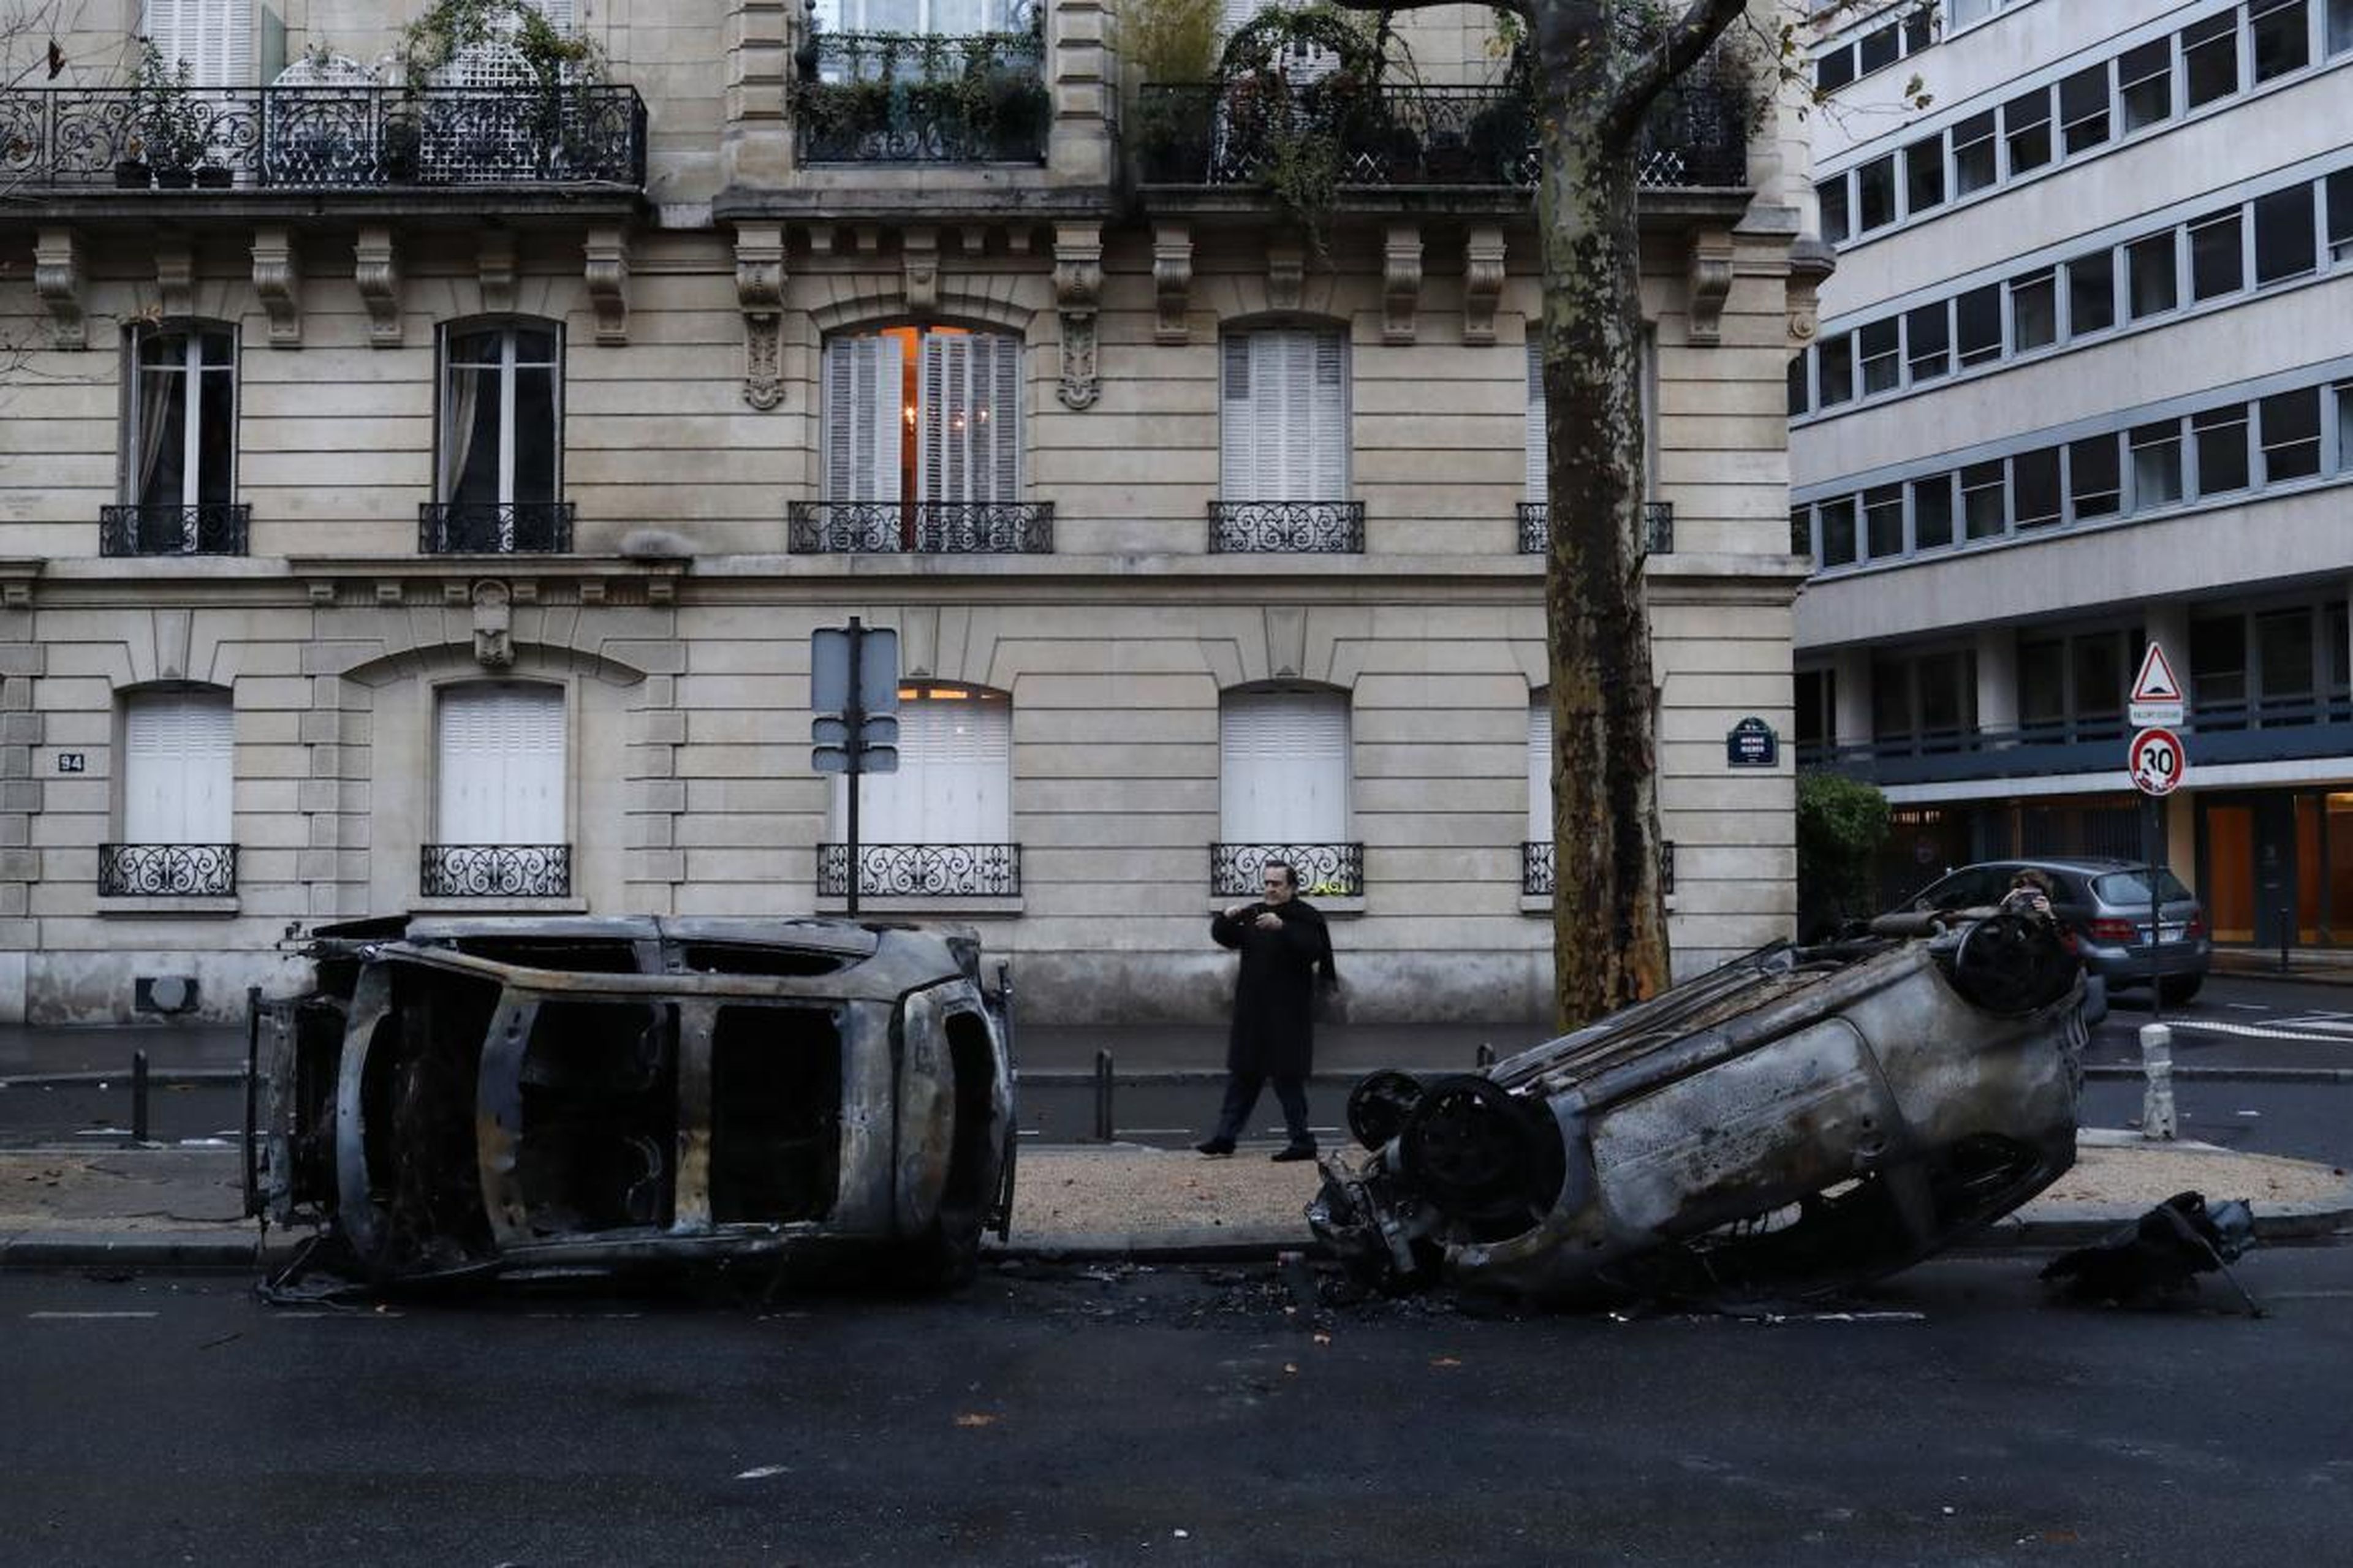 Those surveying the damage on Sunday found that the protests left burned cars and smashed stores in several of the wealthiest neighborhoods of Paris.